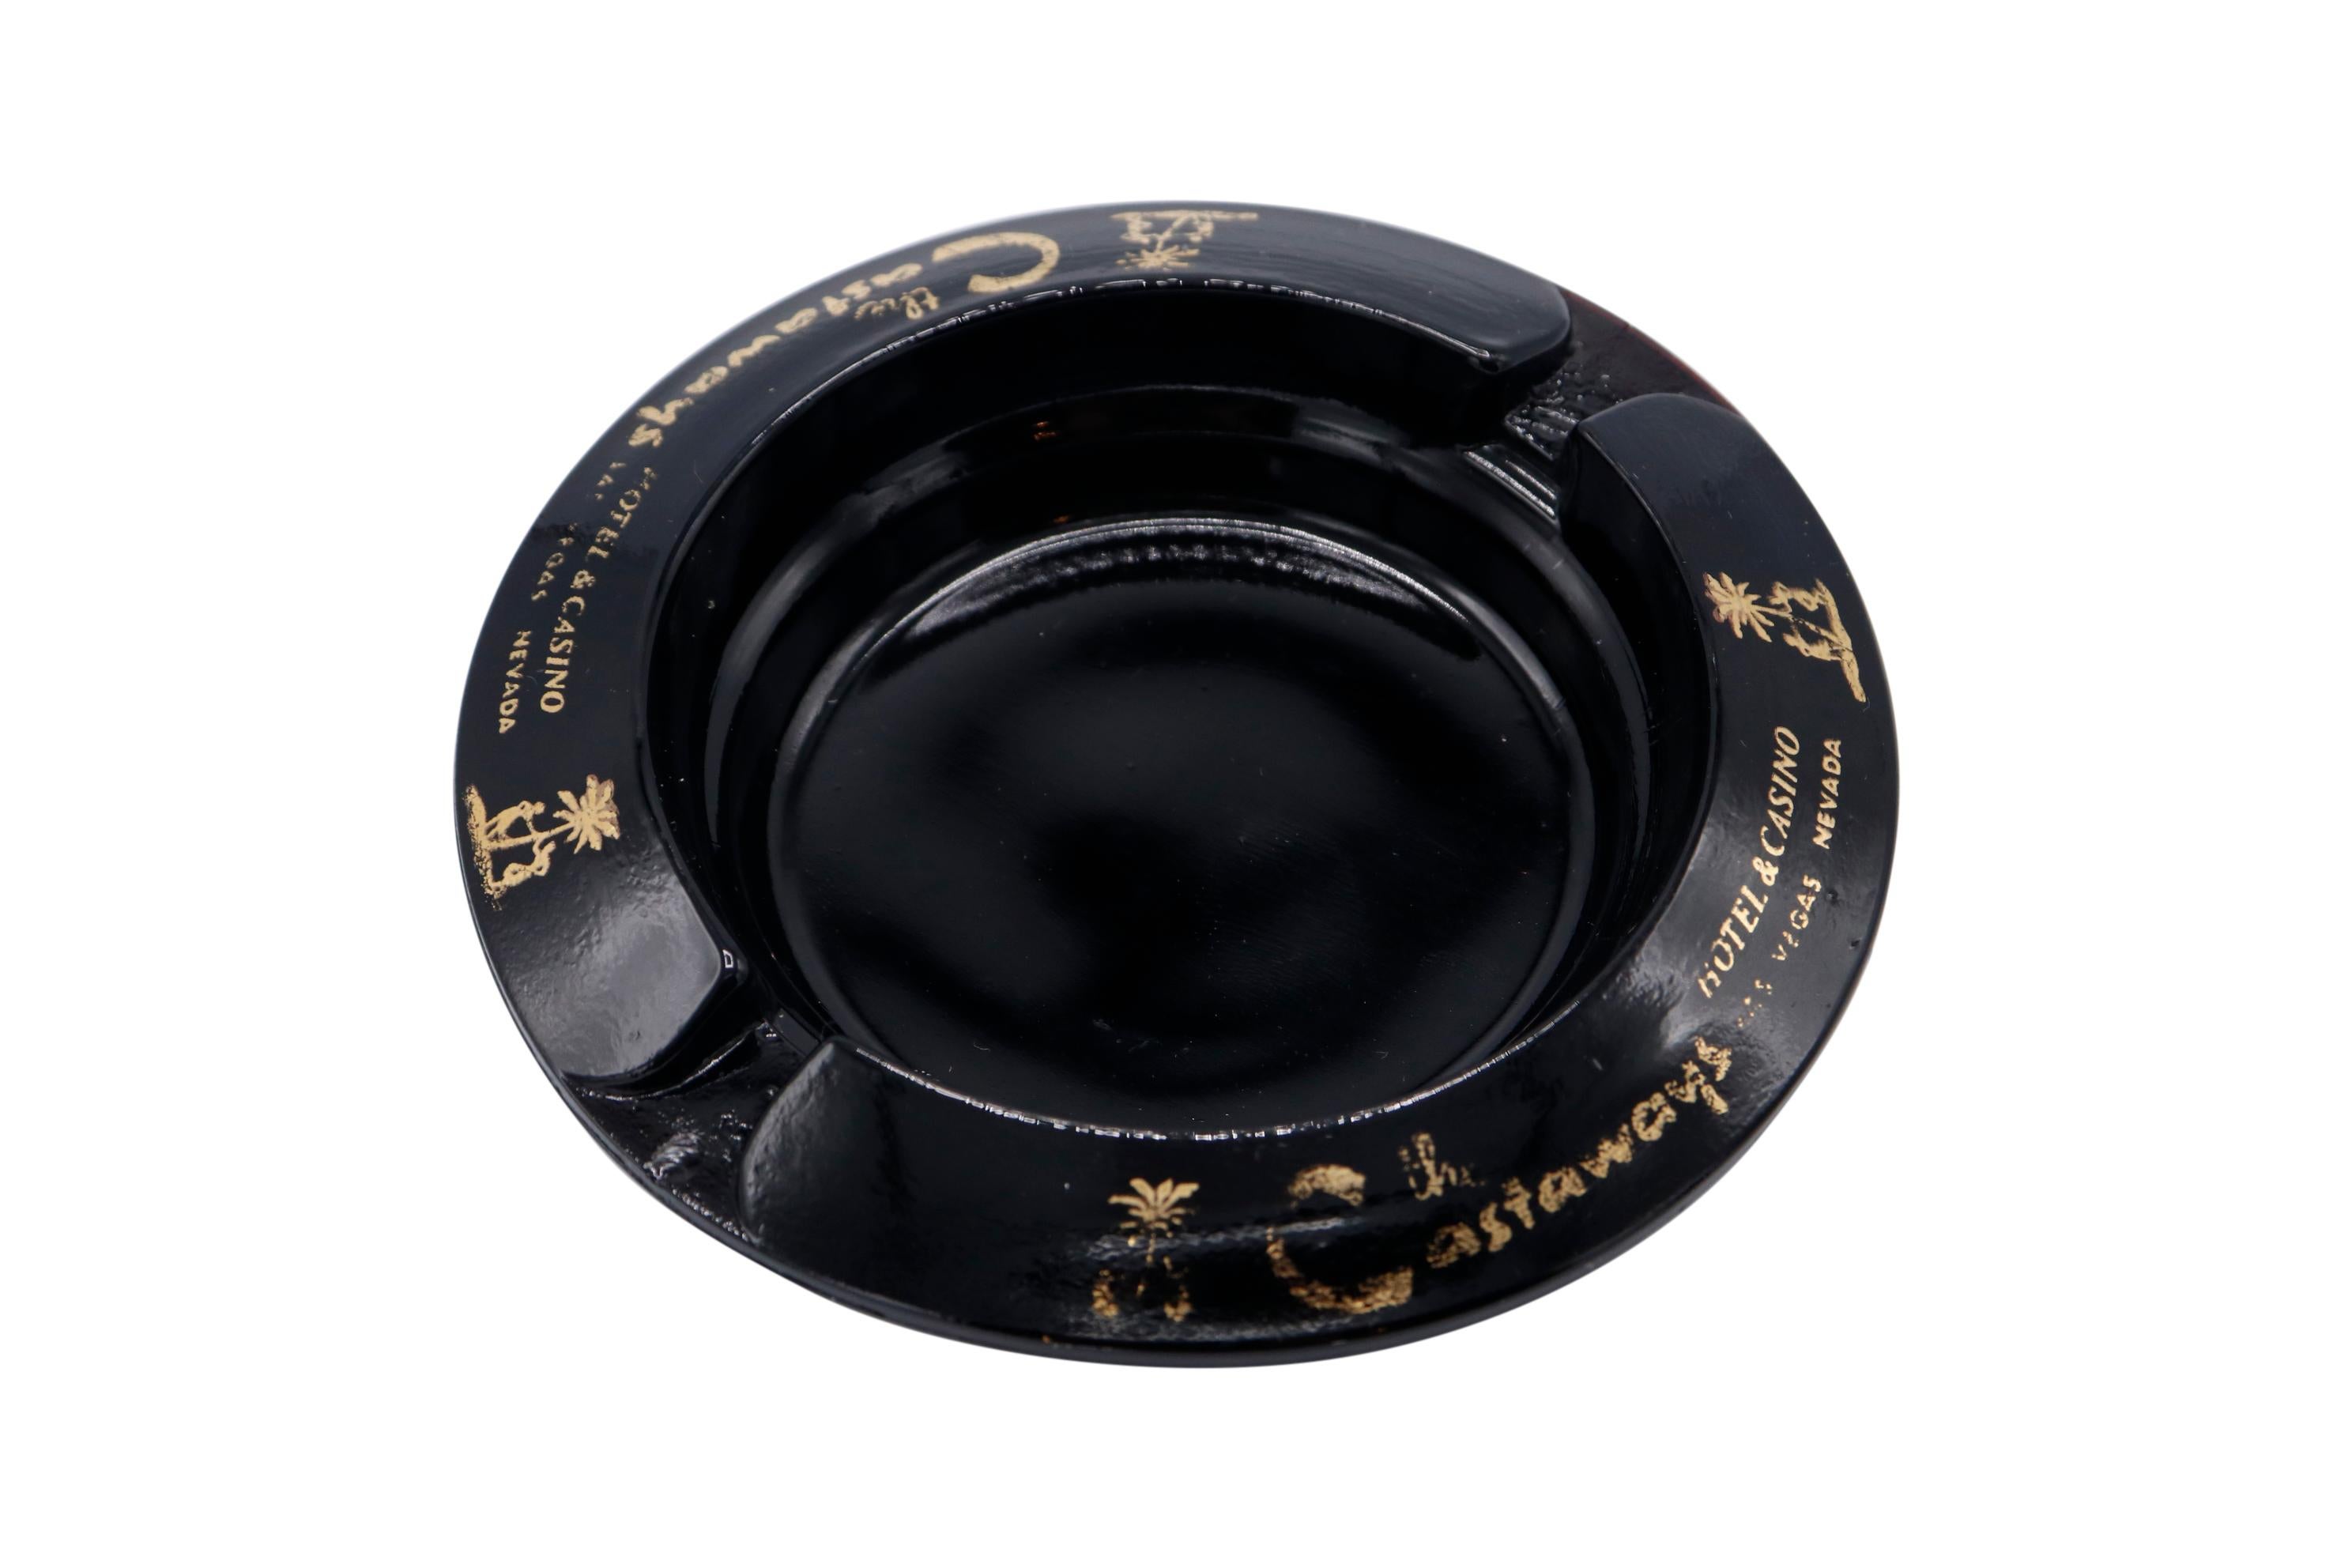 A pair of black glass ashtrays from The Castaways Hotel, a hotel and casino in Paradise, Las Vegas, Nevada. The lip is printed with the Castaways logo. The hotel, permanently closed in 1987, was opened in 1963 and purchased in 1967 by billionaire